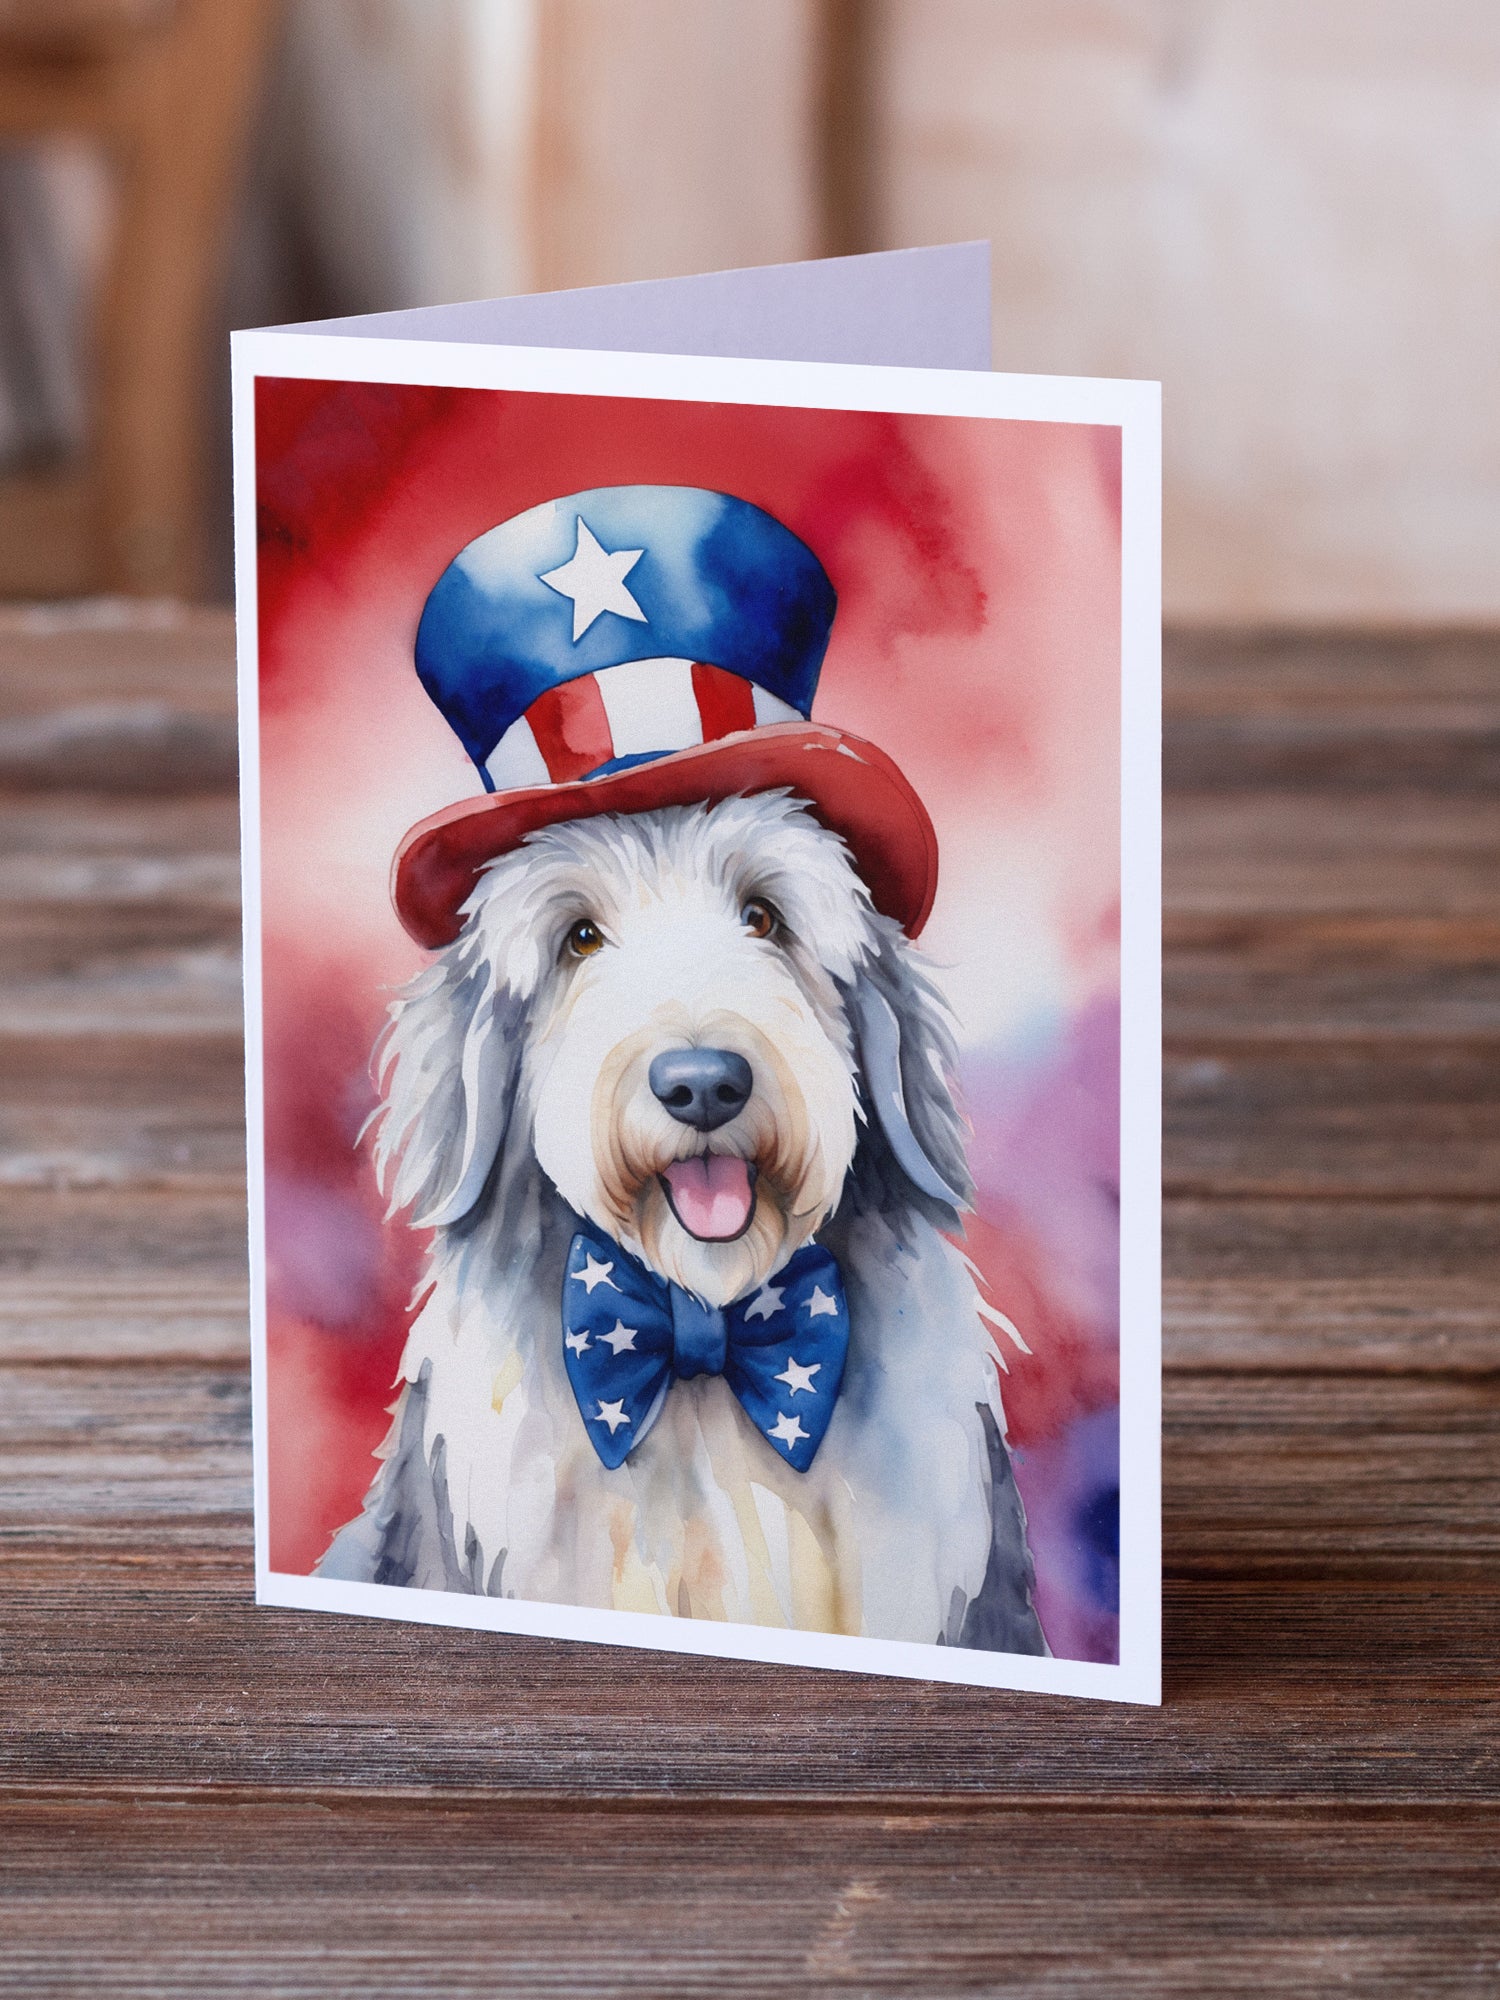 Buy this Old English Sheepdog Patriotic American Greeting Cards Pack of 8